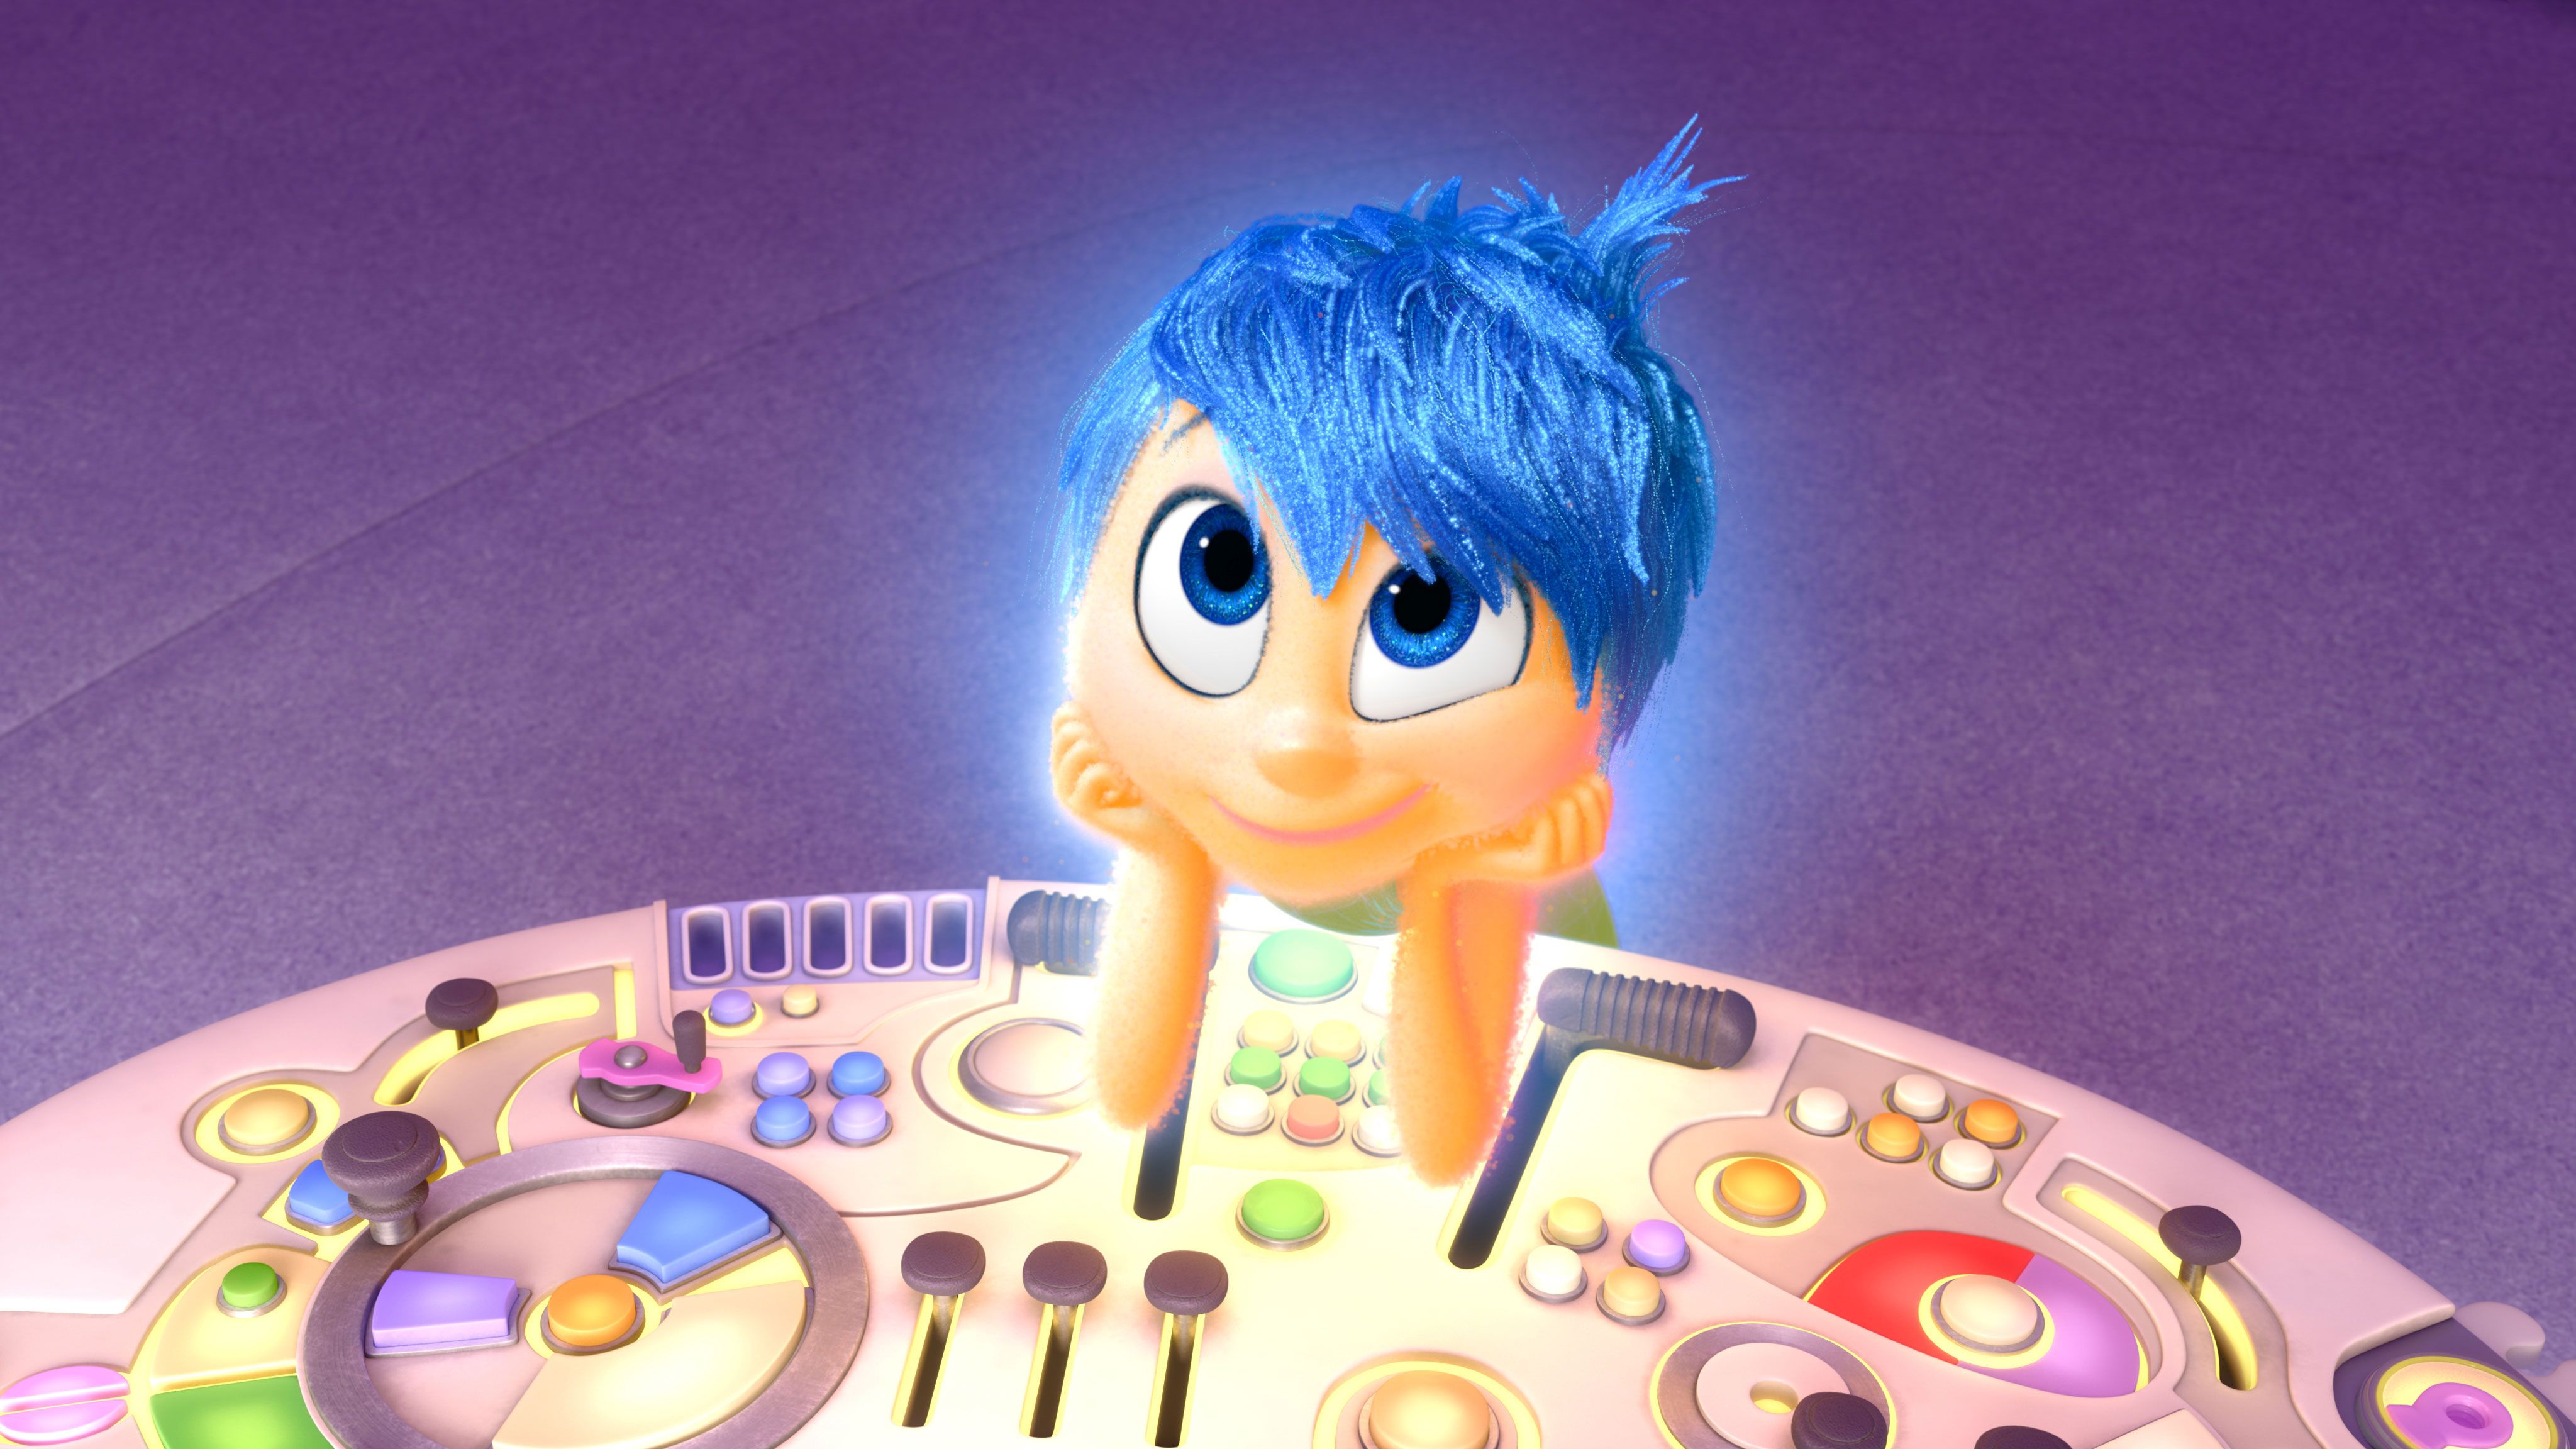 Inside Out Review: Pixar’s Latest Is an Emotional Triumph | Collider